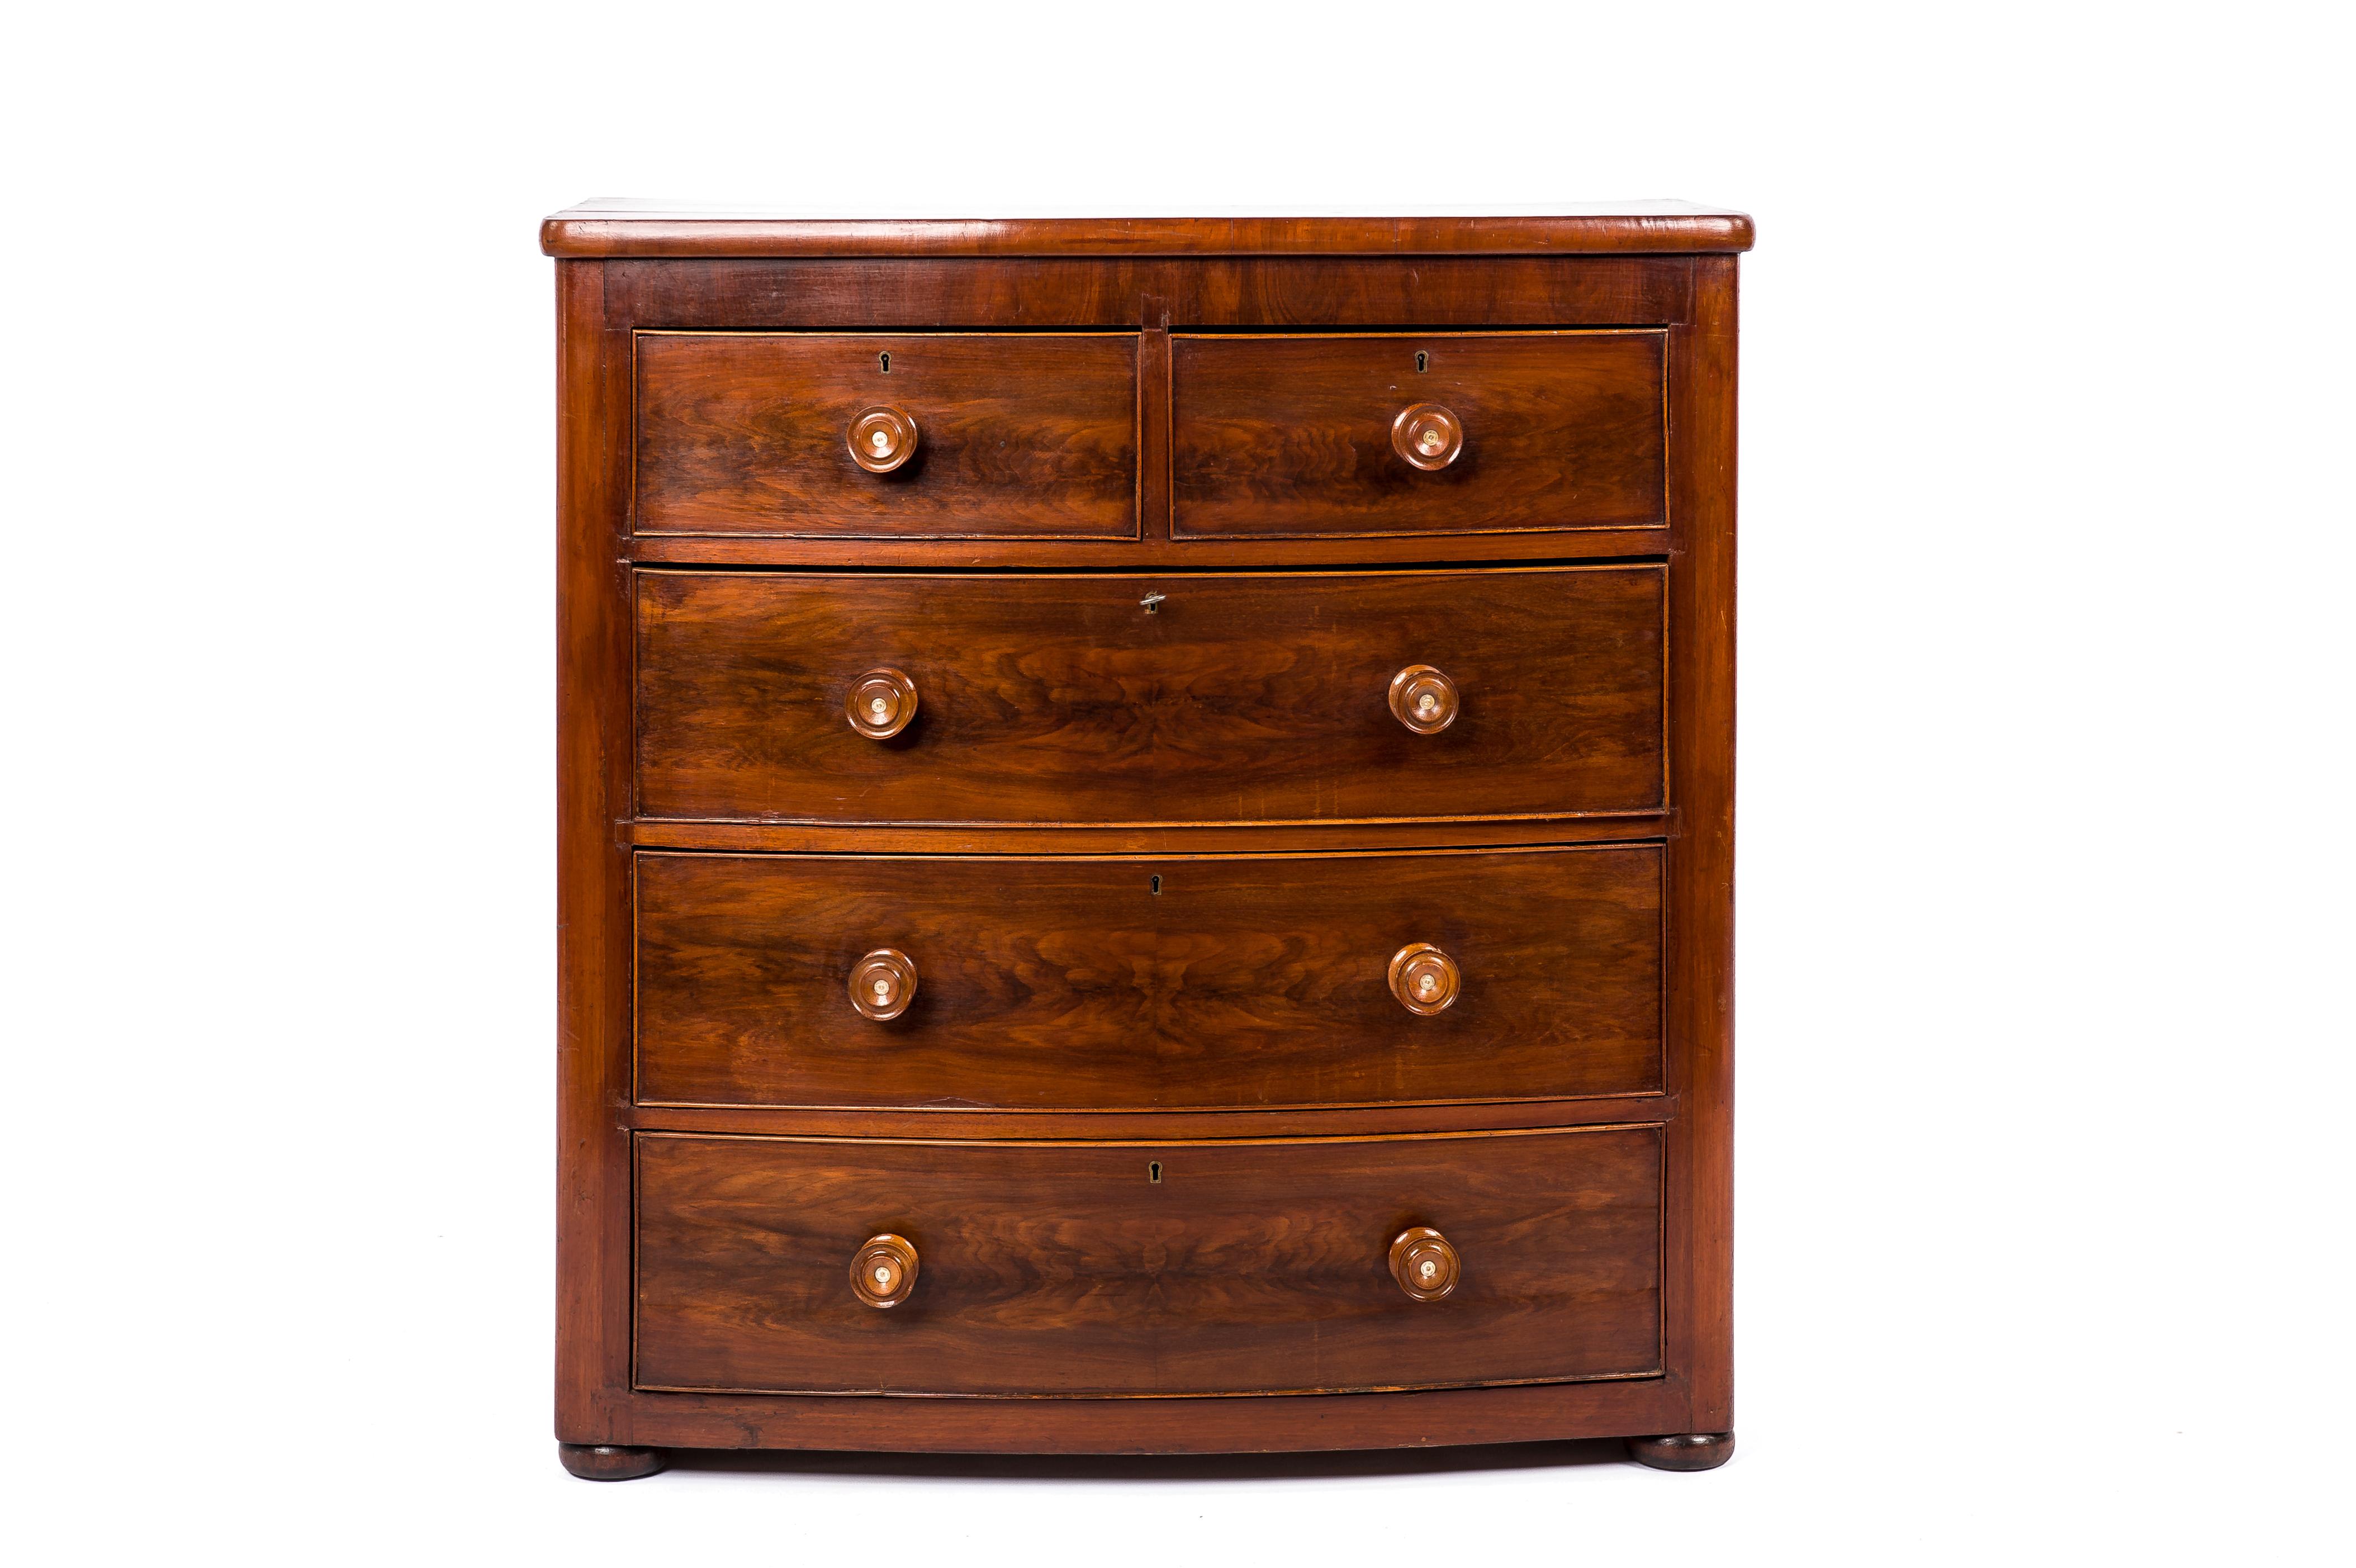 This beautiful sleek commode or chest of drawers was made in England in the late 19th century, circa 1840. The piece has a bow front that houses five drawers in total all of which are equipped with a working lock. A key that fits all locks is